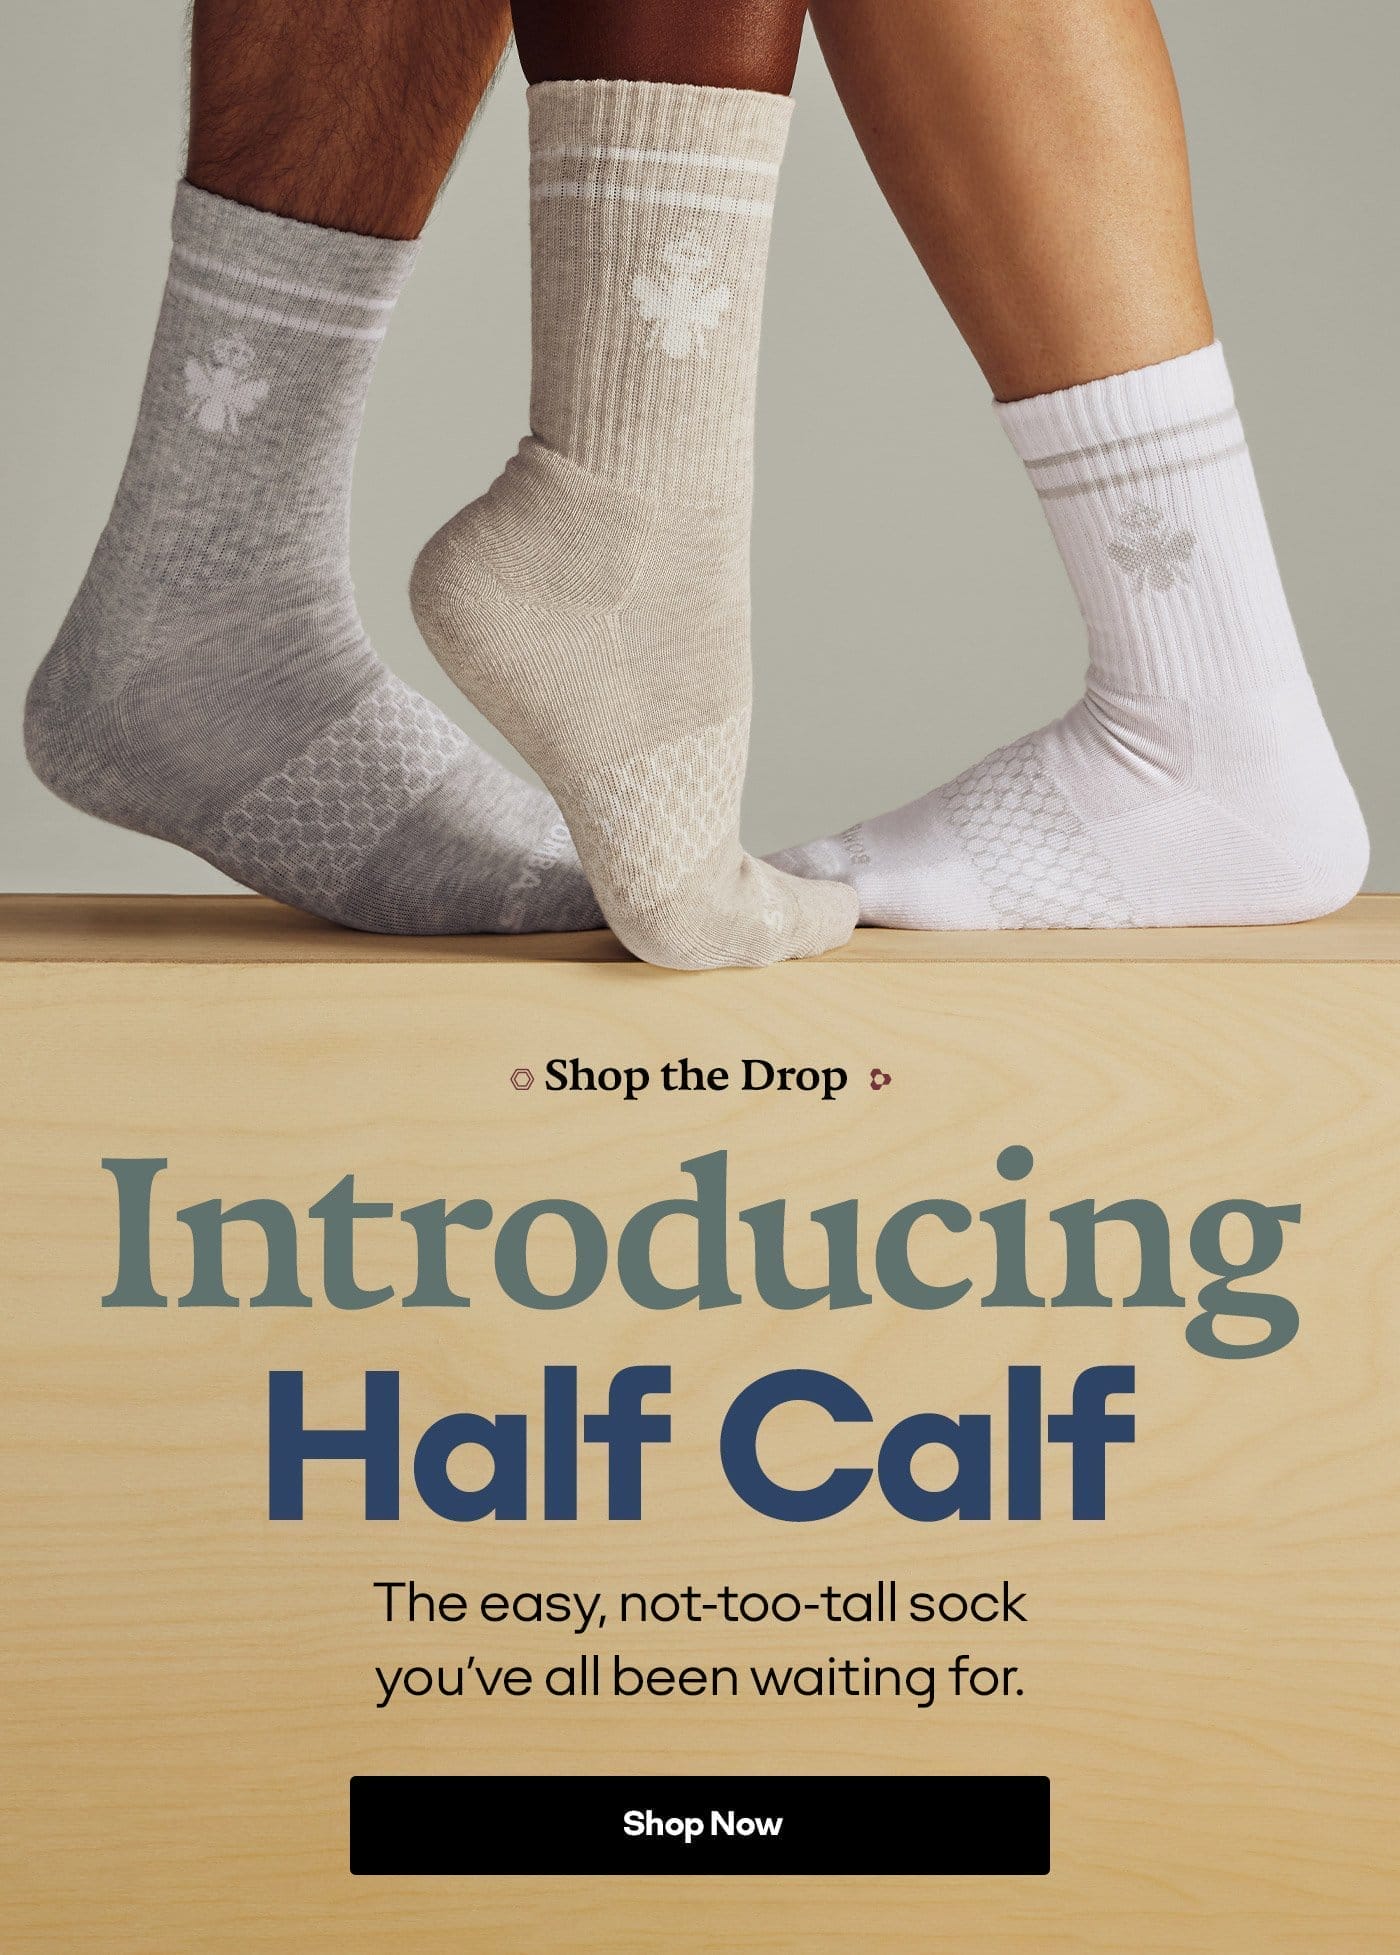 Shop the Drop Introducing Half Calf The easy, not-too-tall sock you've all been waiting for. Shop Now